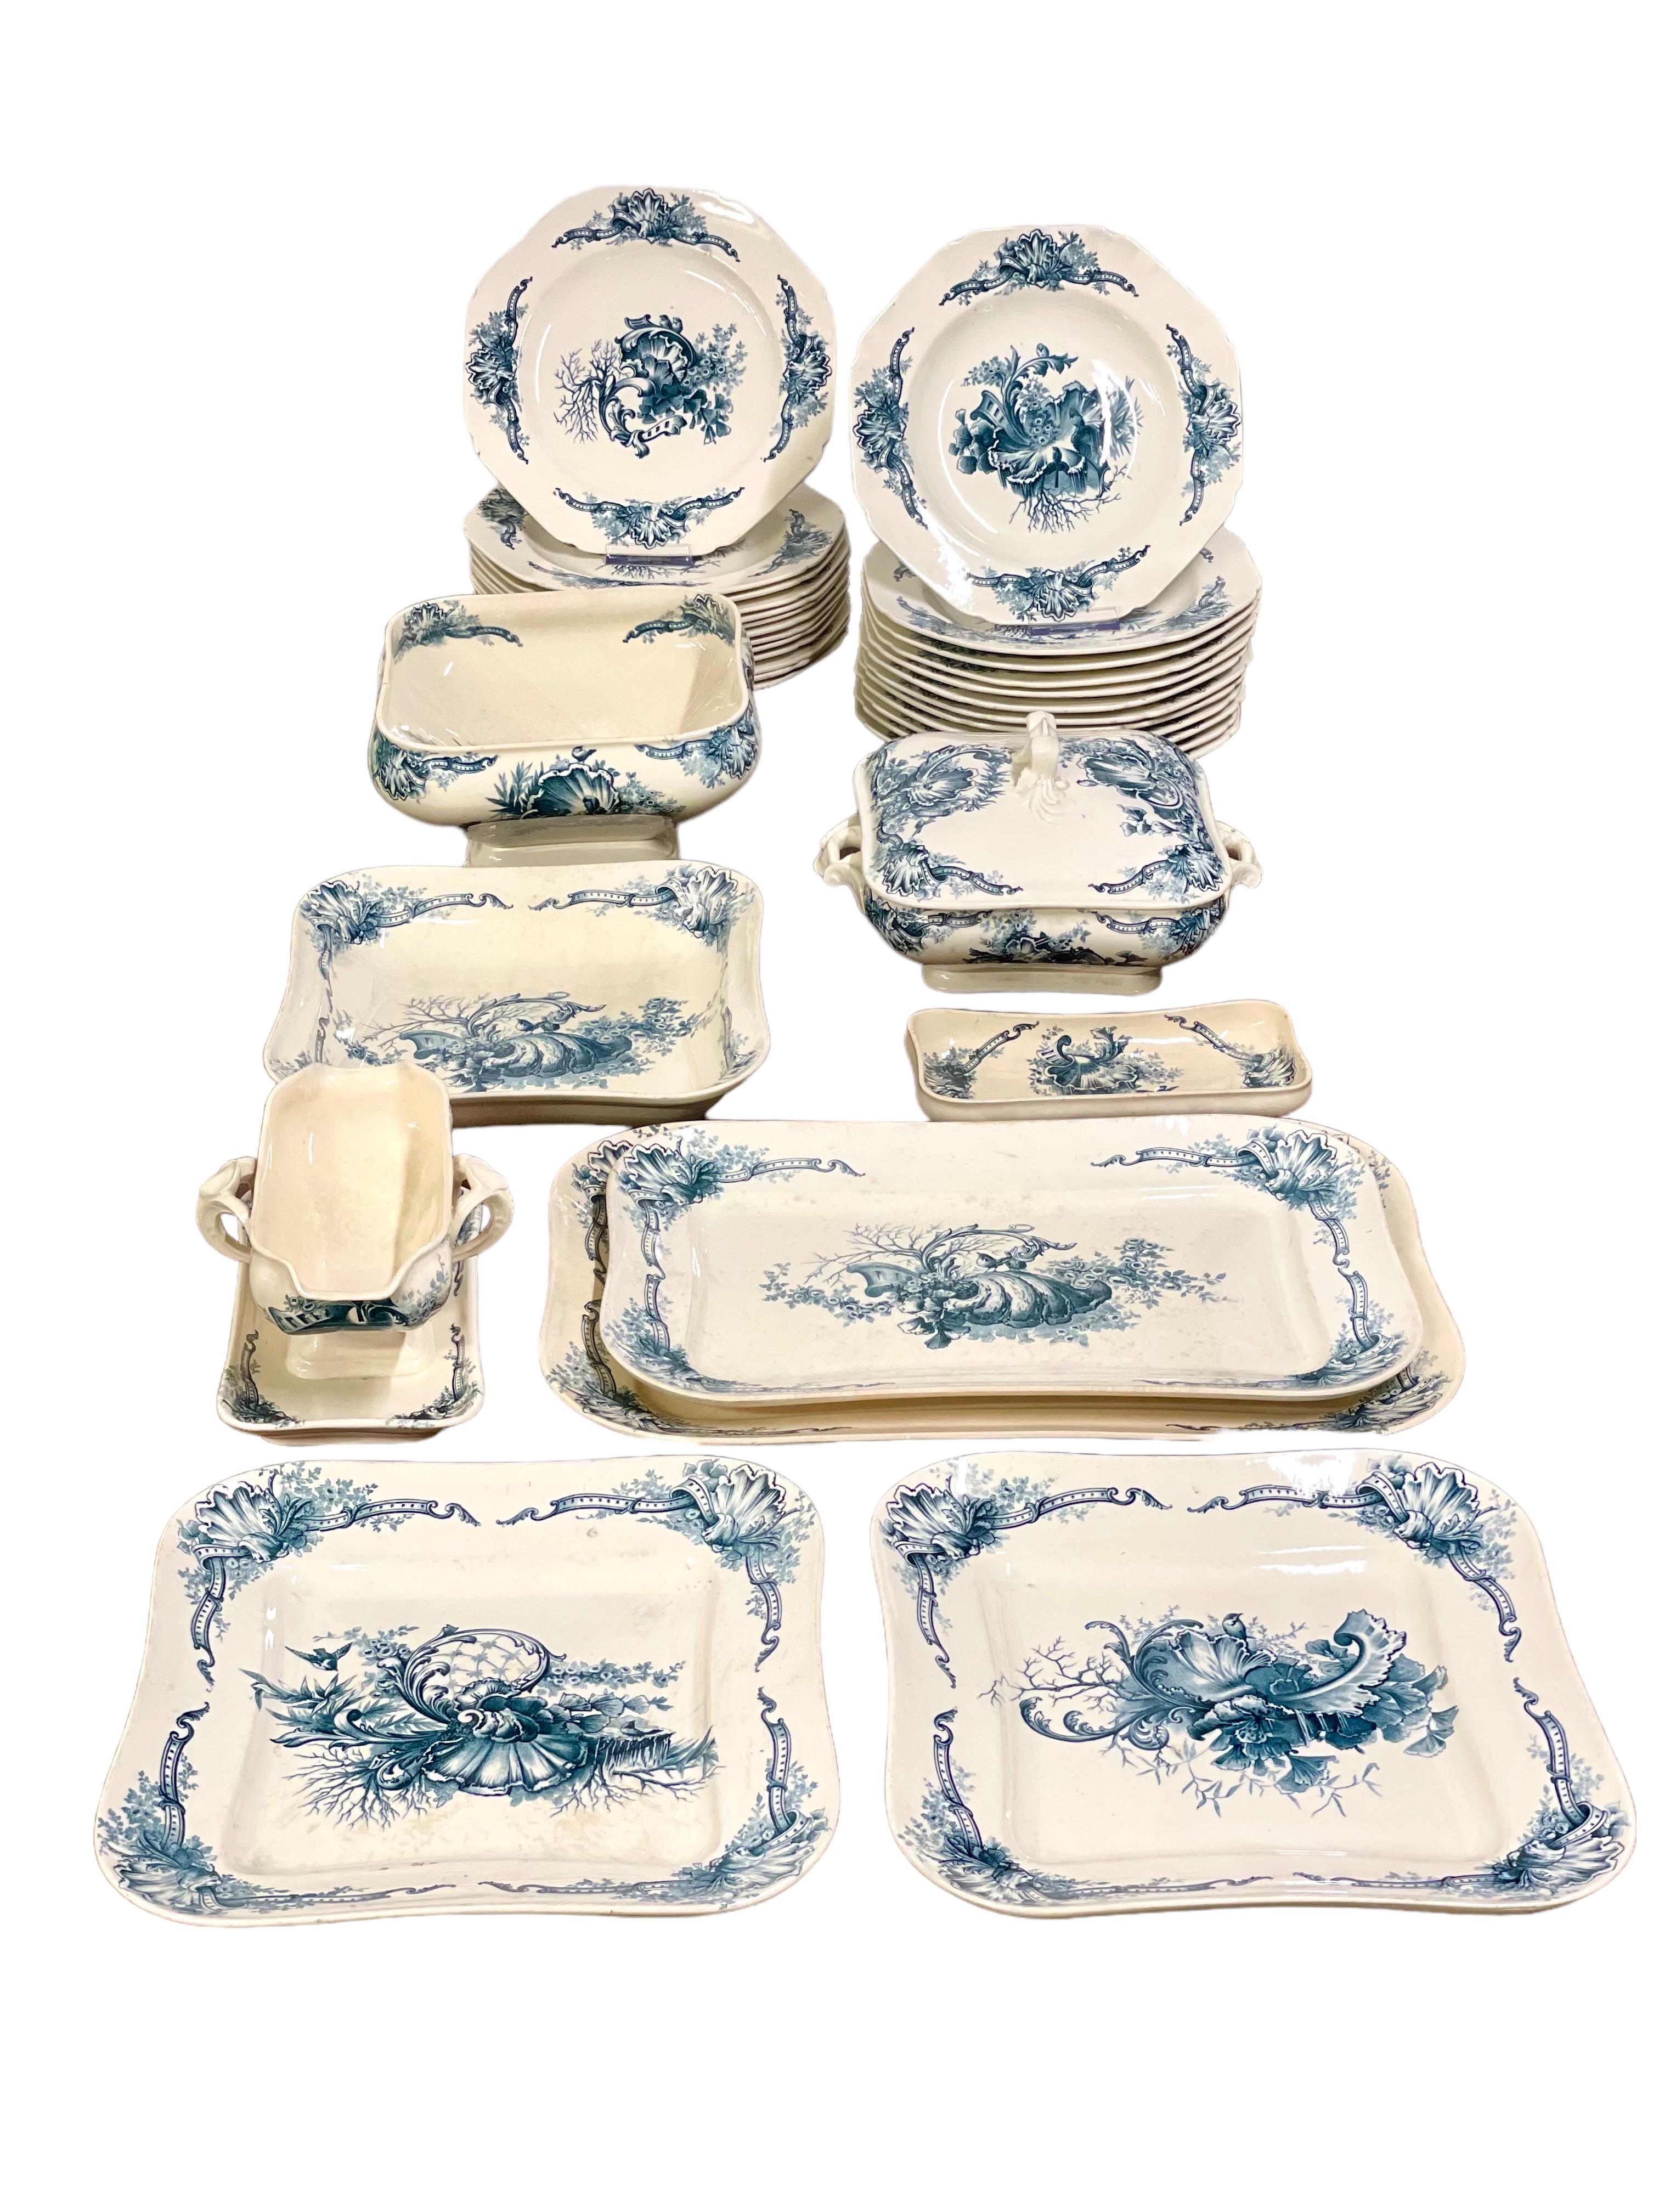 Antique French Blue and White Ironstone Dinner Set di Hautin Boulenger & Cie